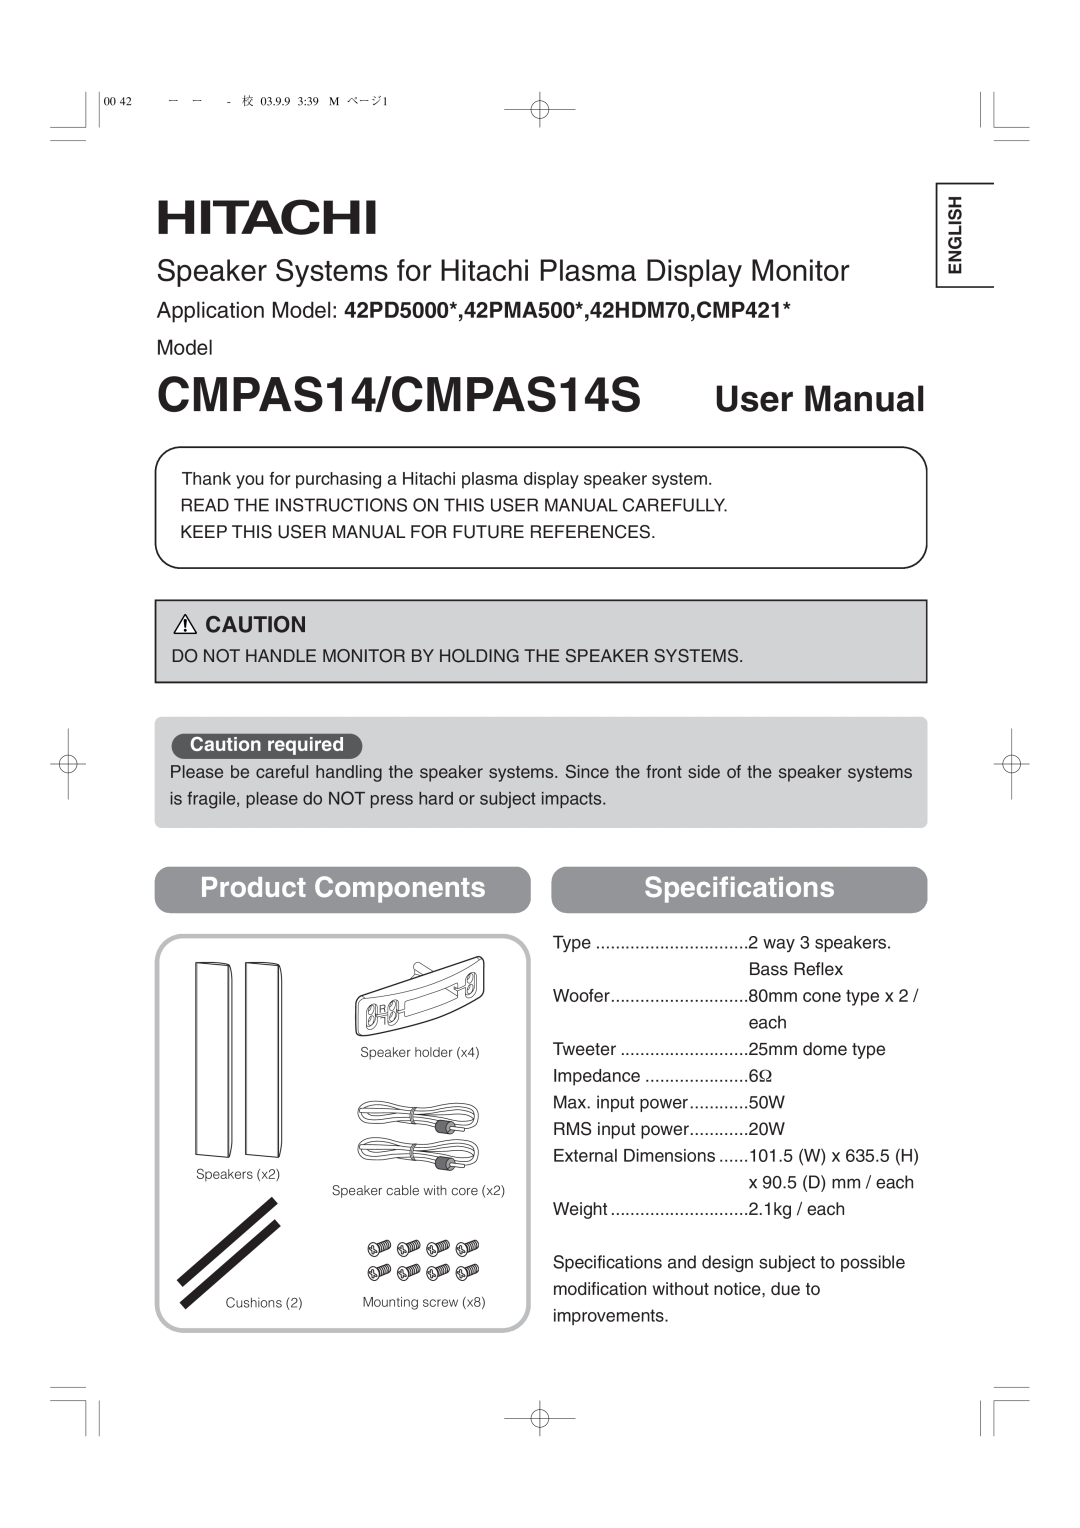 Hitachi 42PD5000 CMPAS14/CMPAS14S User Manual, Speaker Systems for Hitachi Plasma Display Monitor, Product Components 